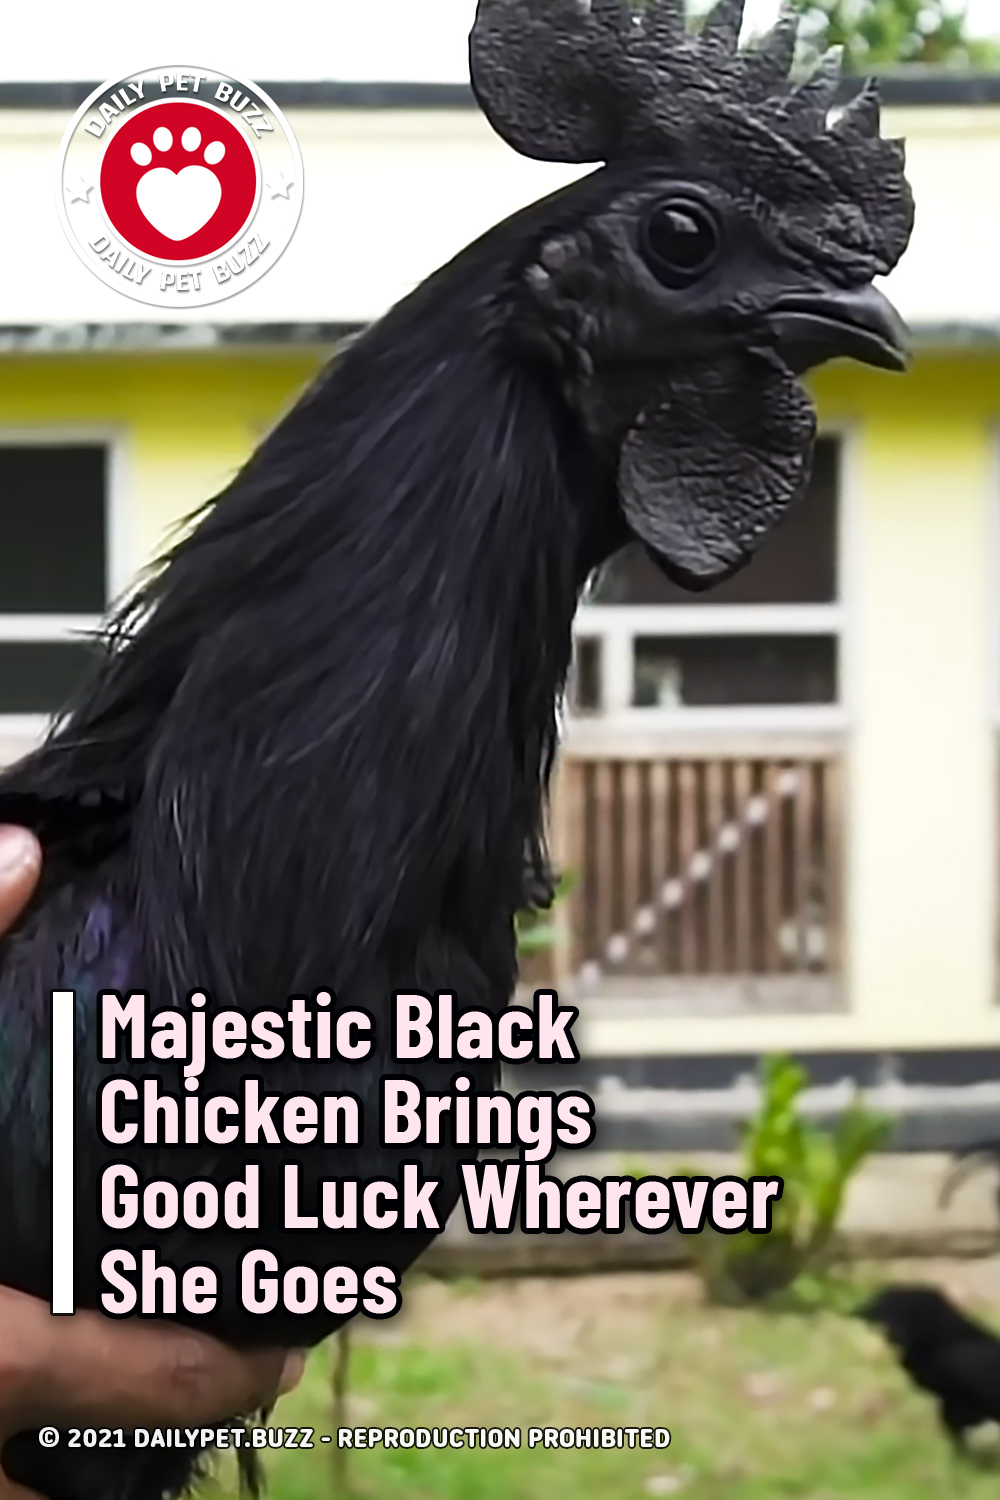 Majestic Black Chicken Brings Good Luck Wherever He Goes